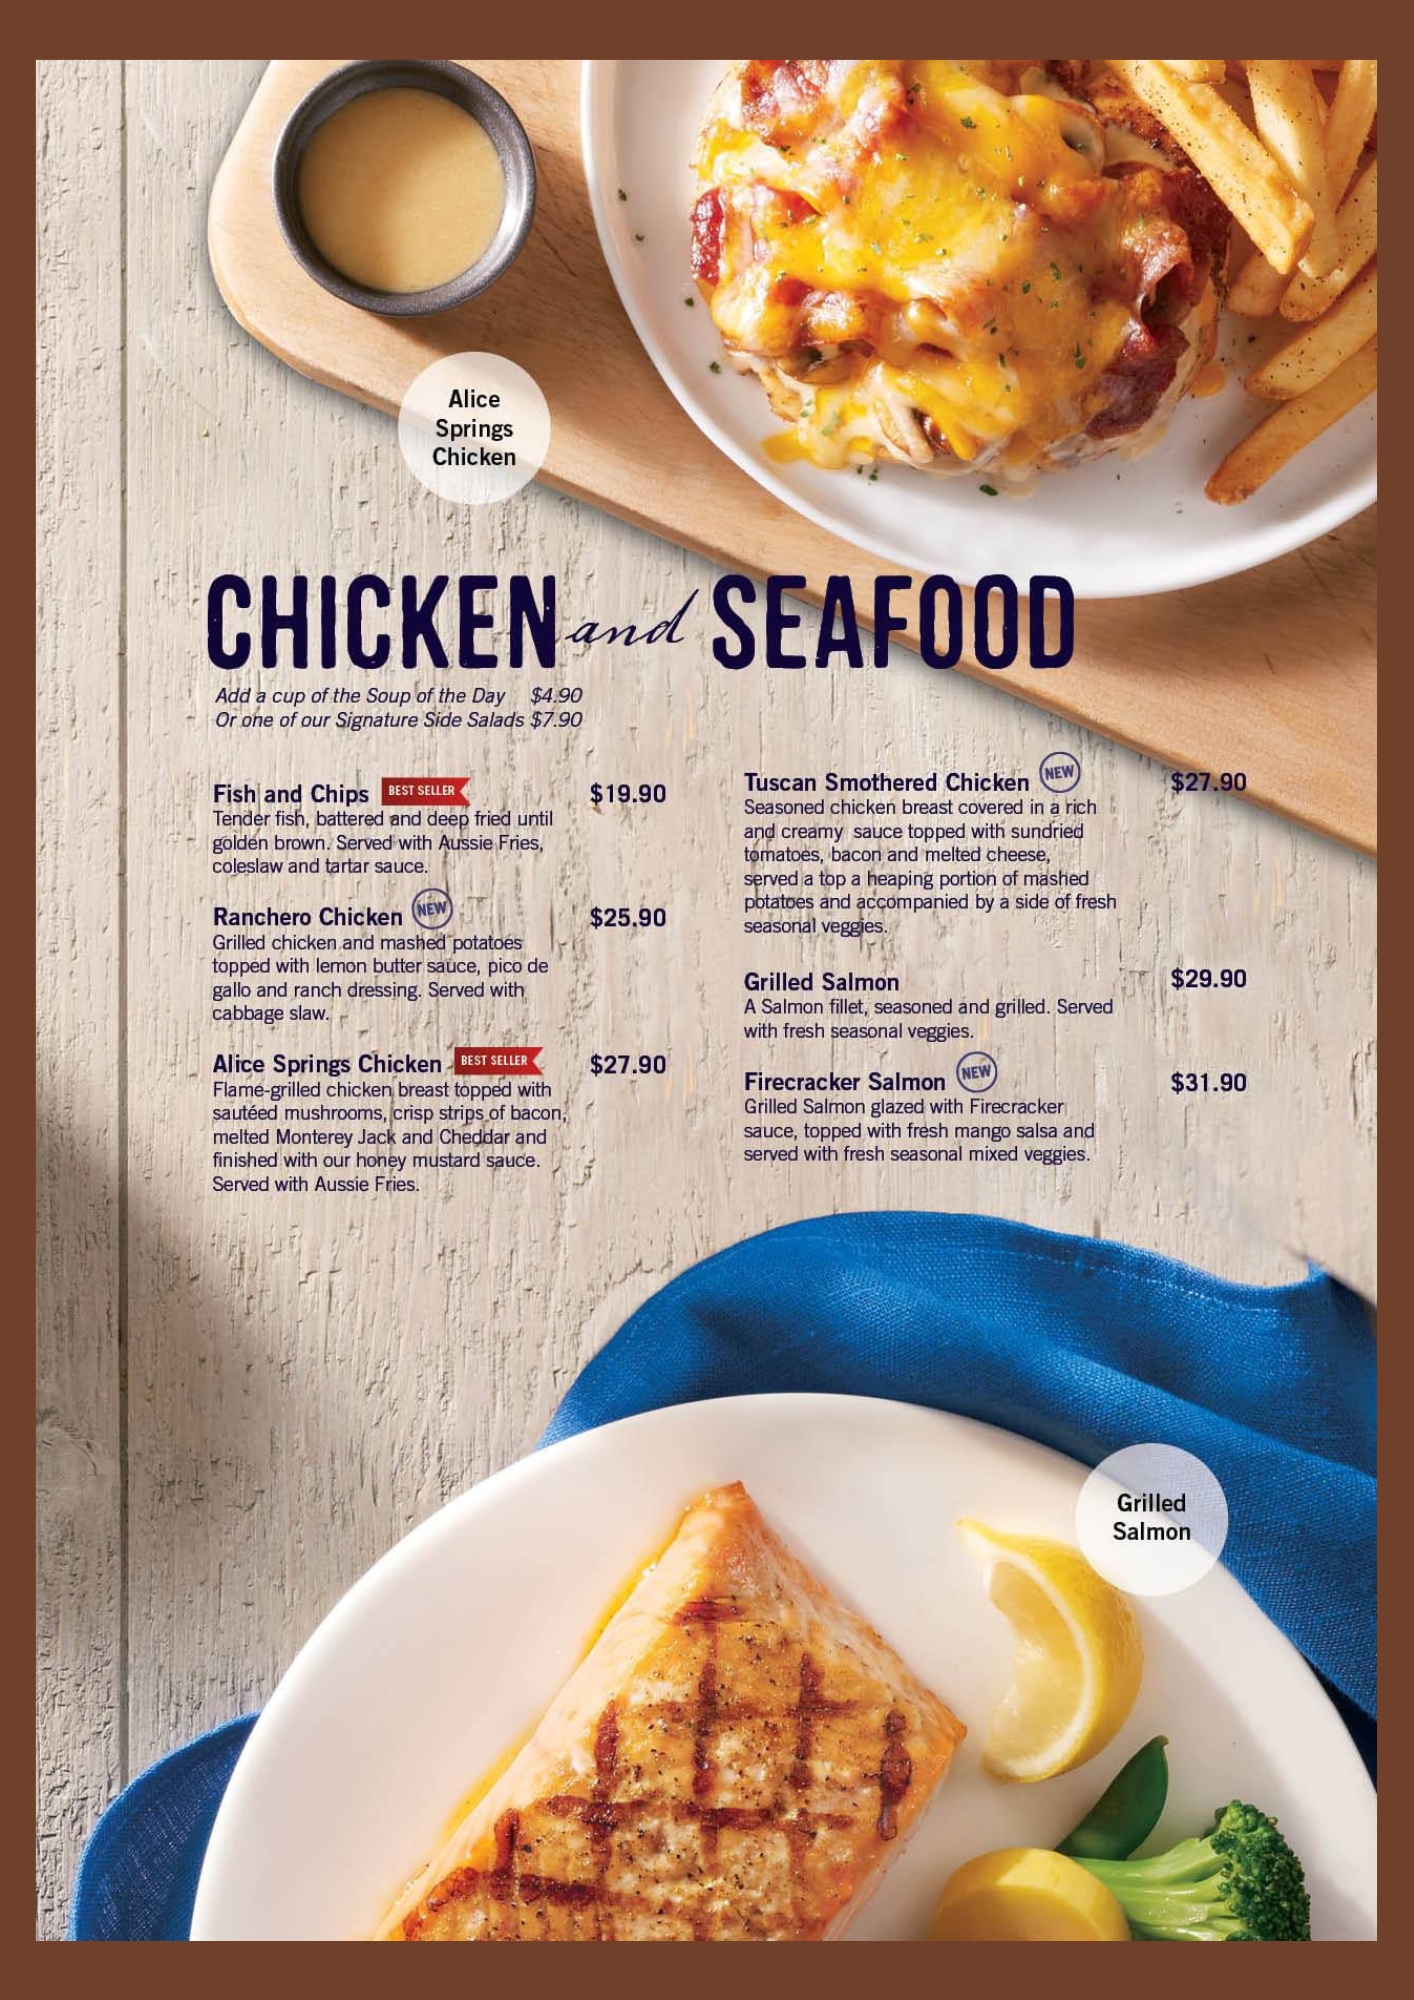 Outback Steakhouse Chicken and Seafood Price